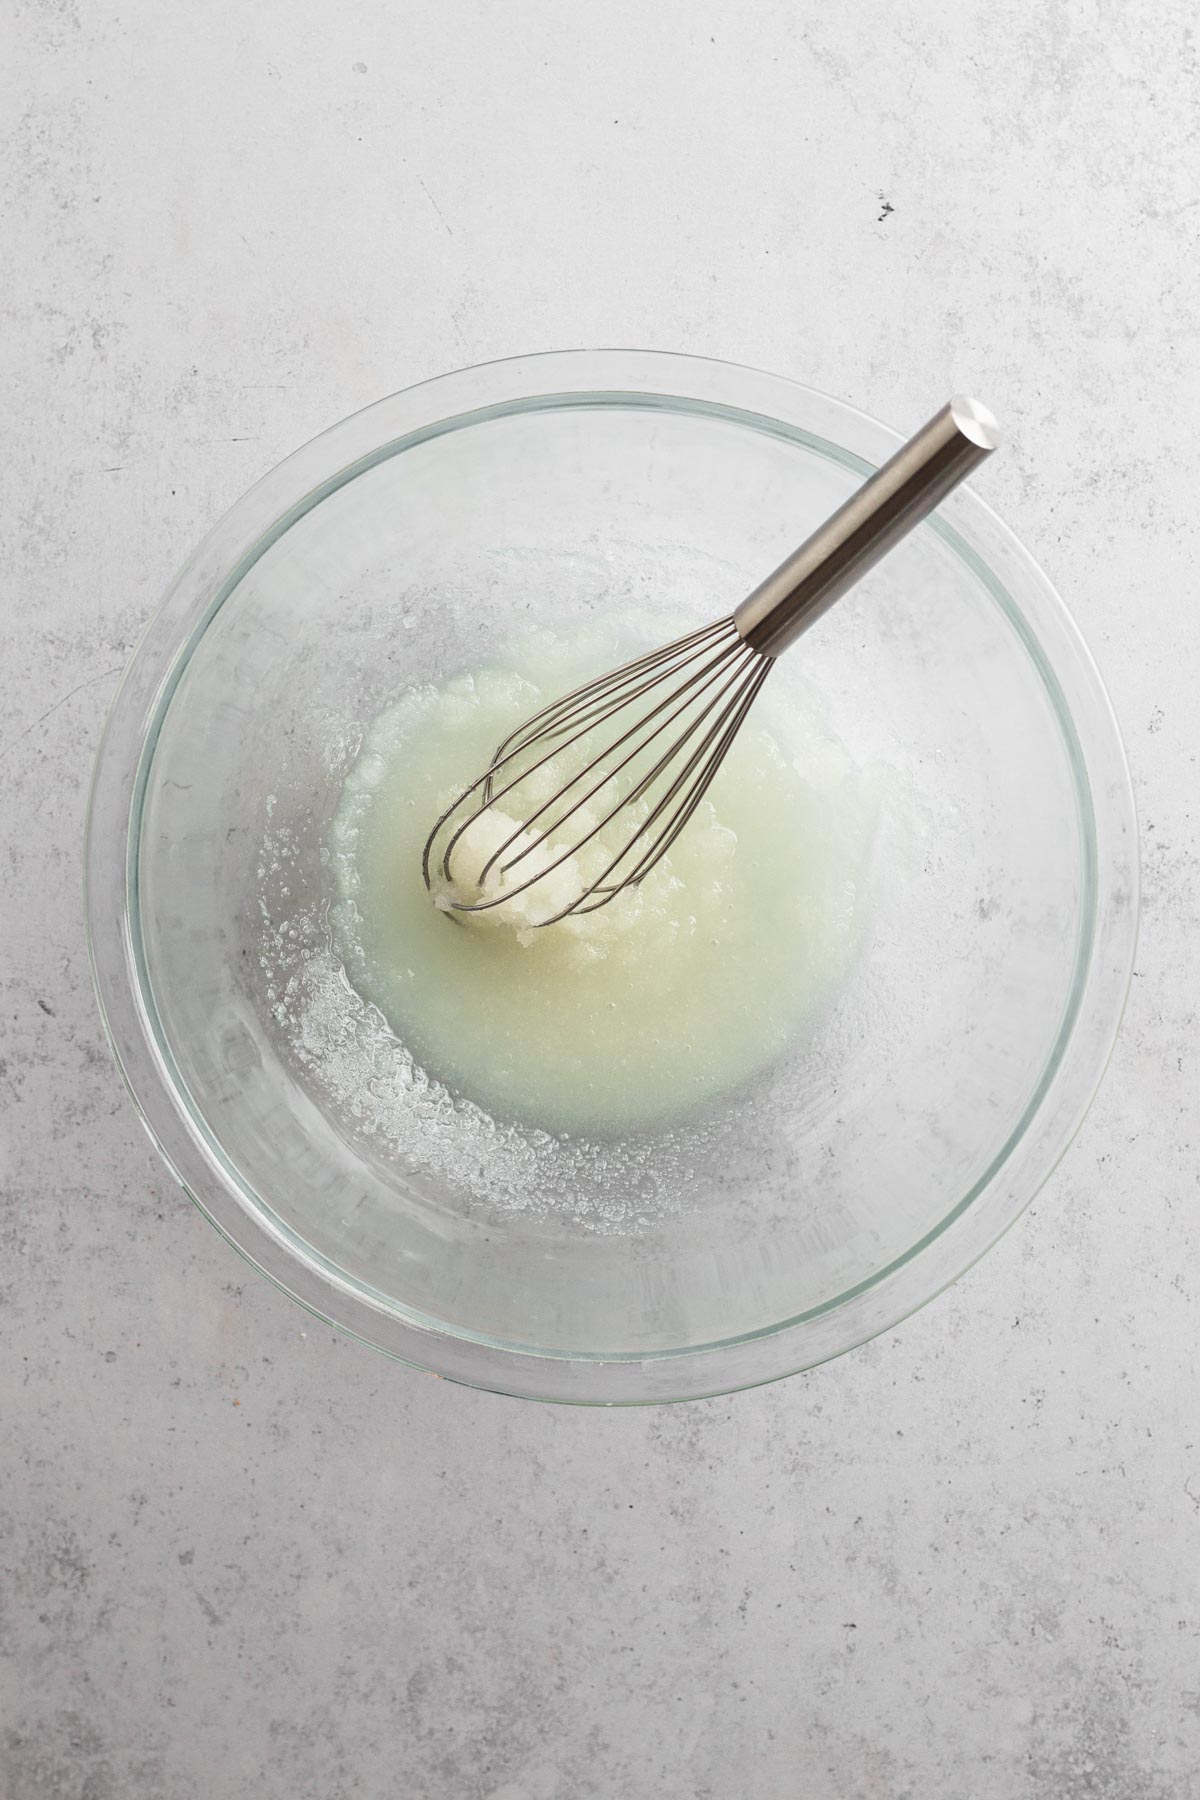 oil and sugar whisked together in a glass bowl